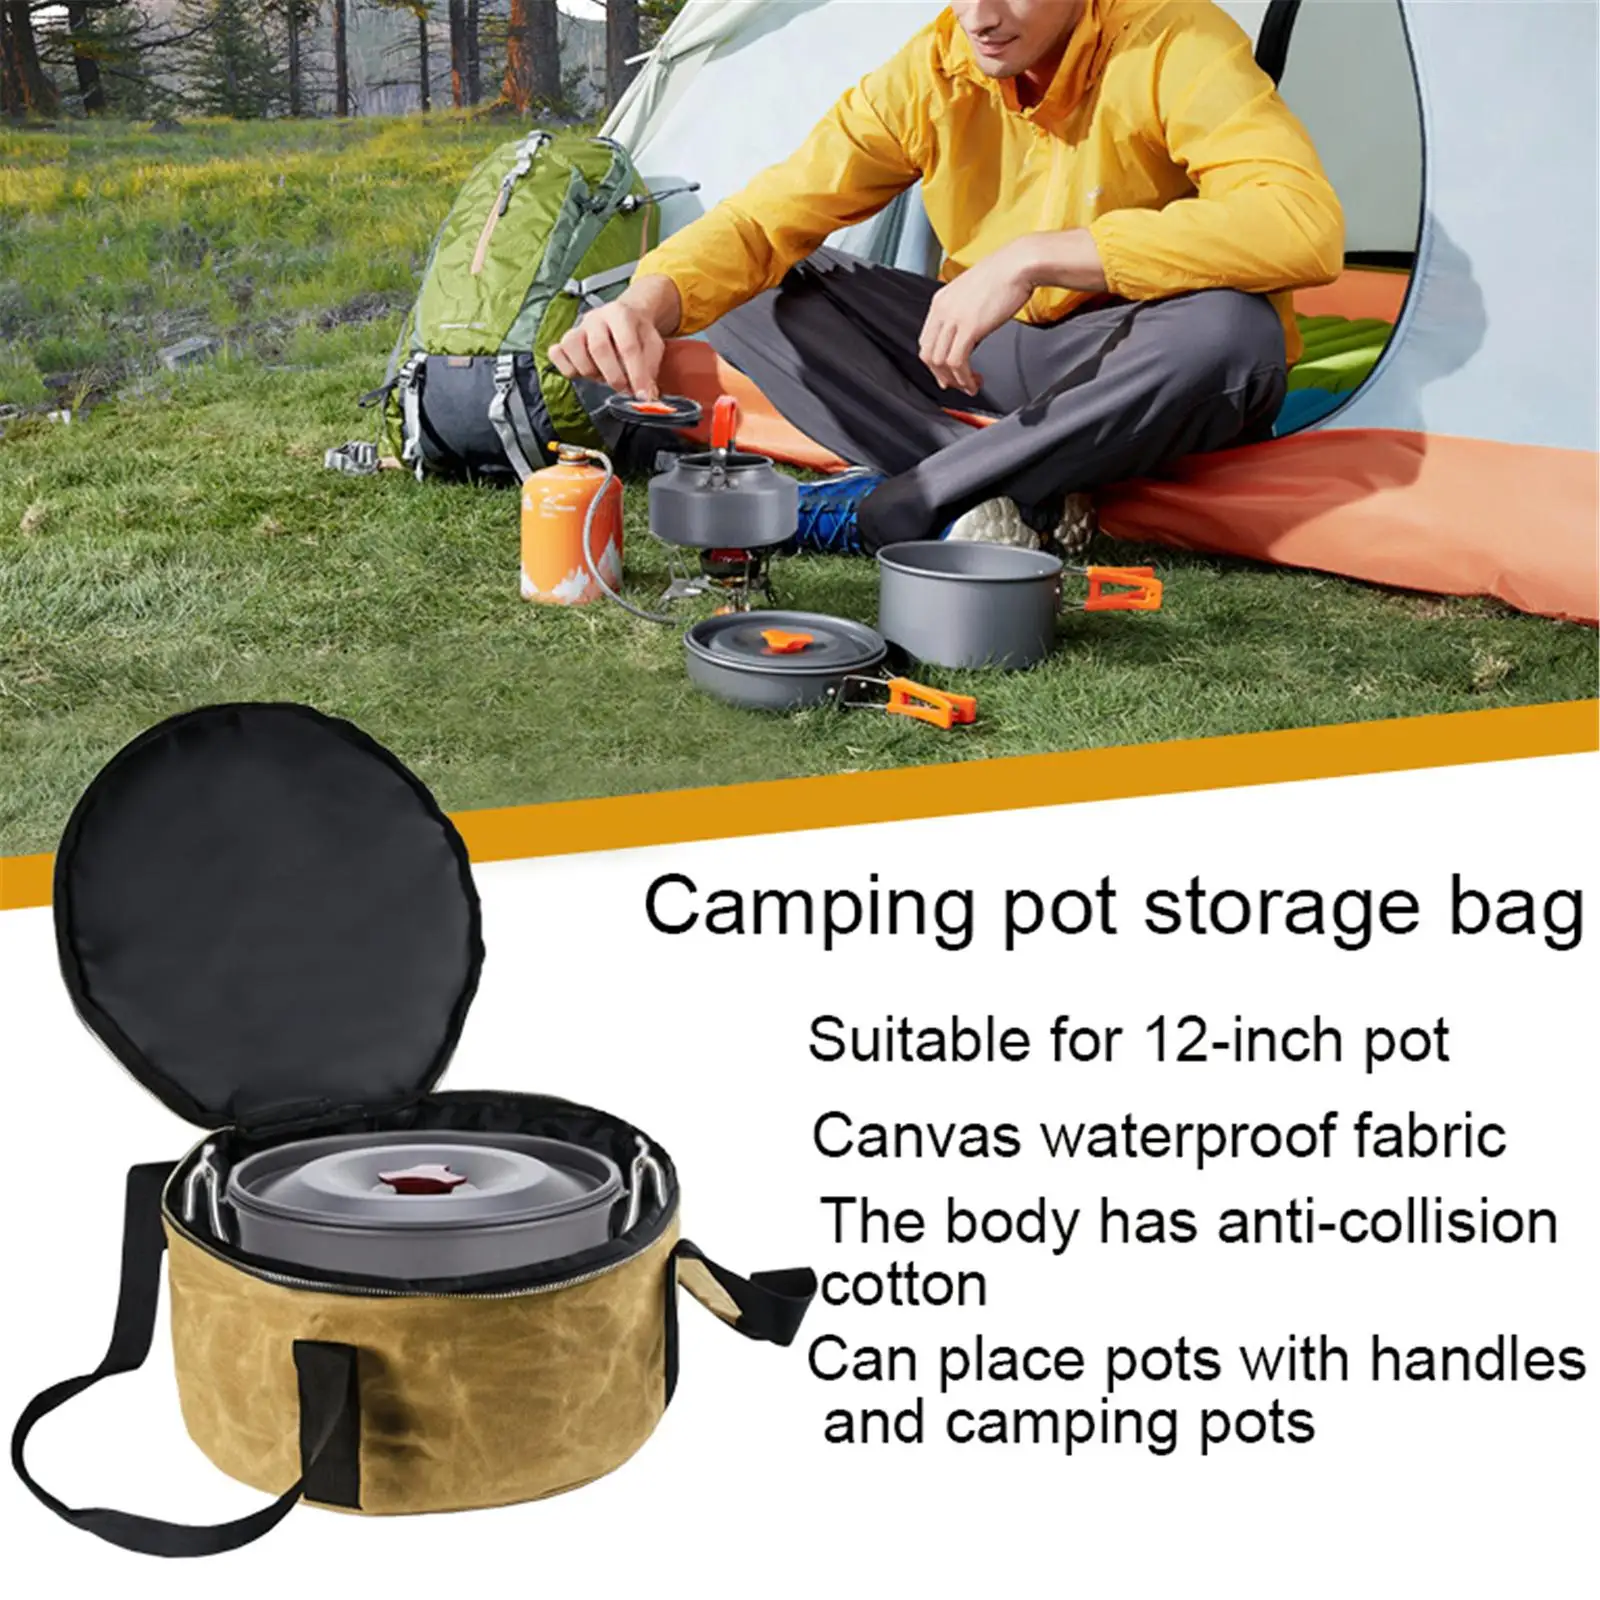 Outdoor Camping Storage Bag Picnic Basket Cooker Pot Tableware Canister BBQ Camping Travel Meal Carry Bag Camp Cooking Supplies